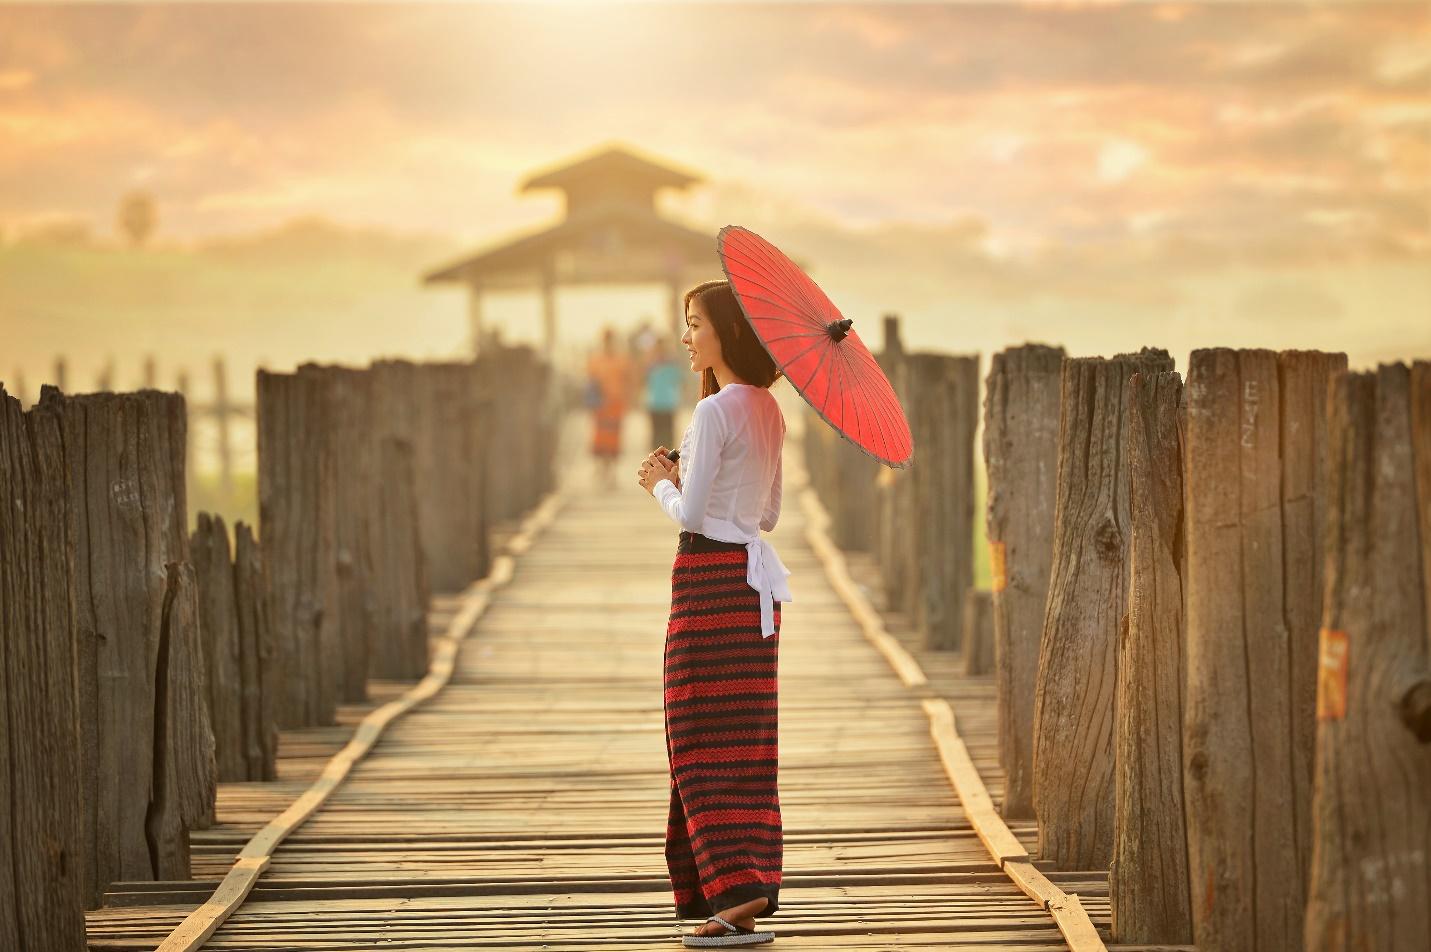 A person holding an umbrella on a boardwalk  Description automatically generated with medium confidence